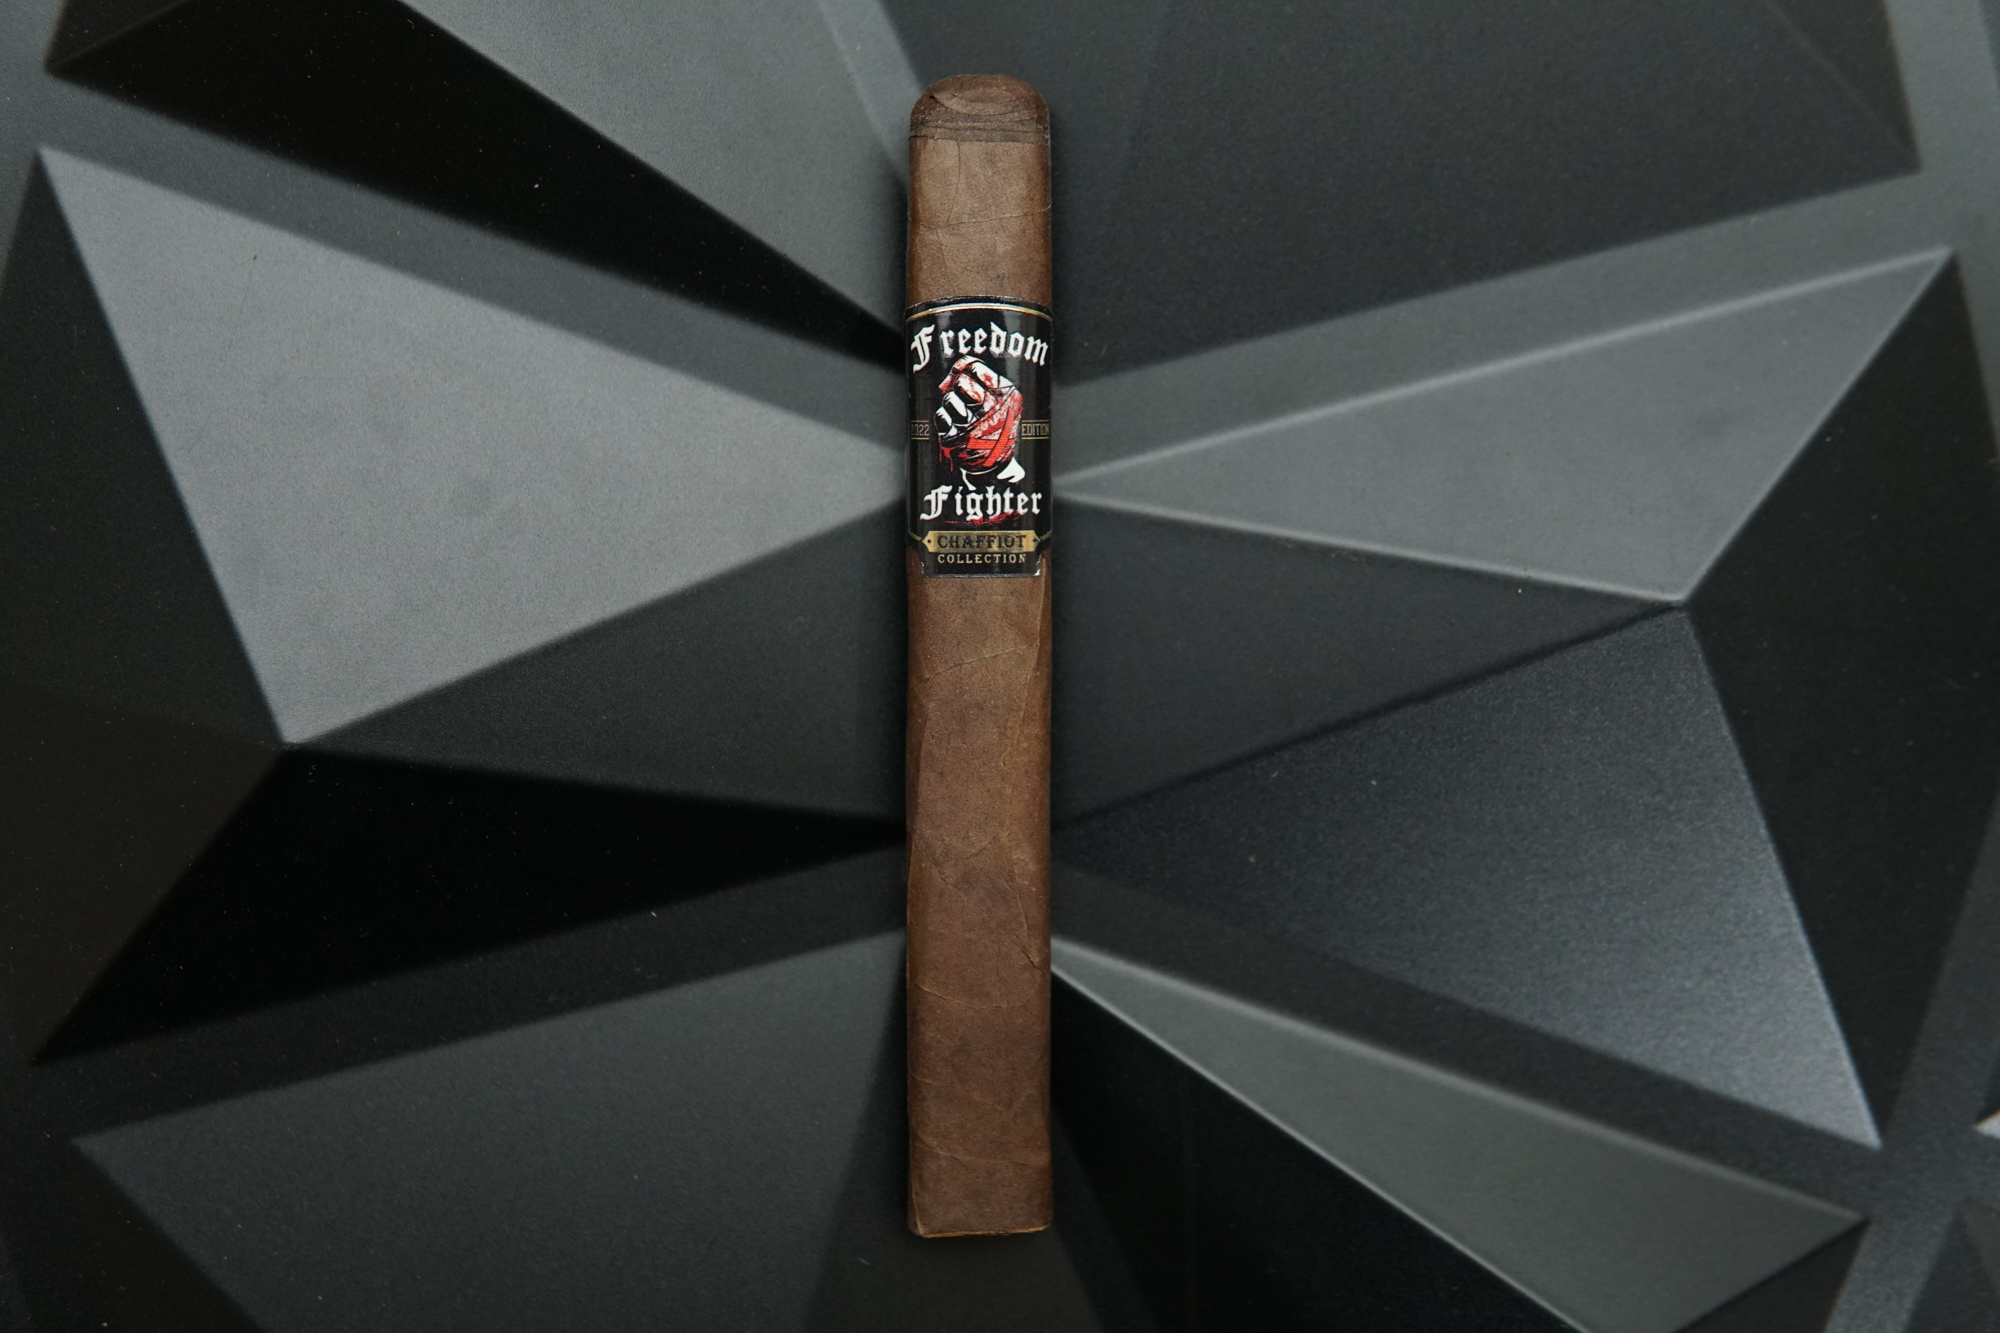 Buy Chaffiot Freedom Fighter Cigar Online